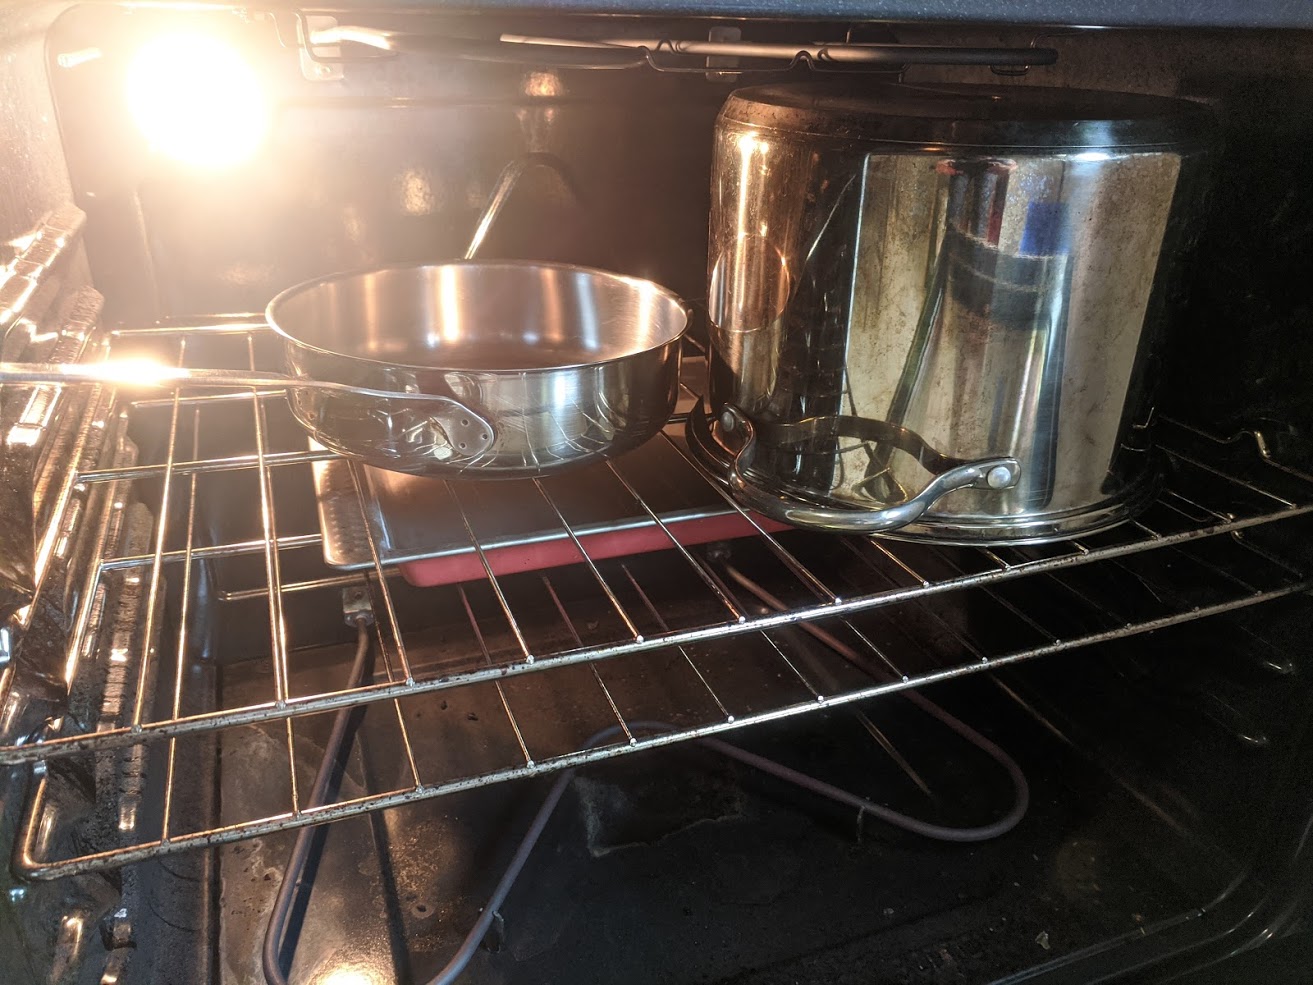 July 11, 2020. A sketchy setup involving three different disparate non-fitting pieces of kitchen equipment.